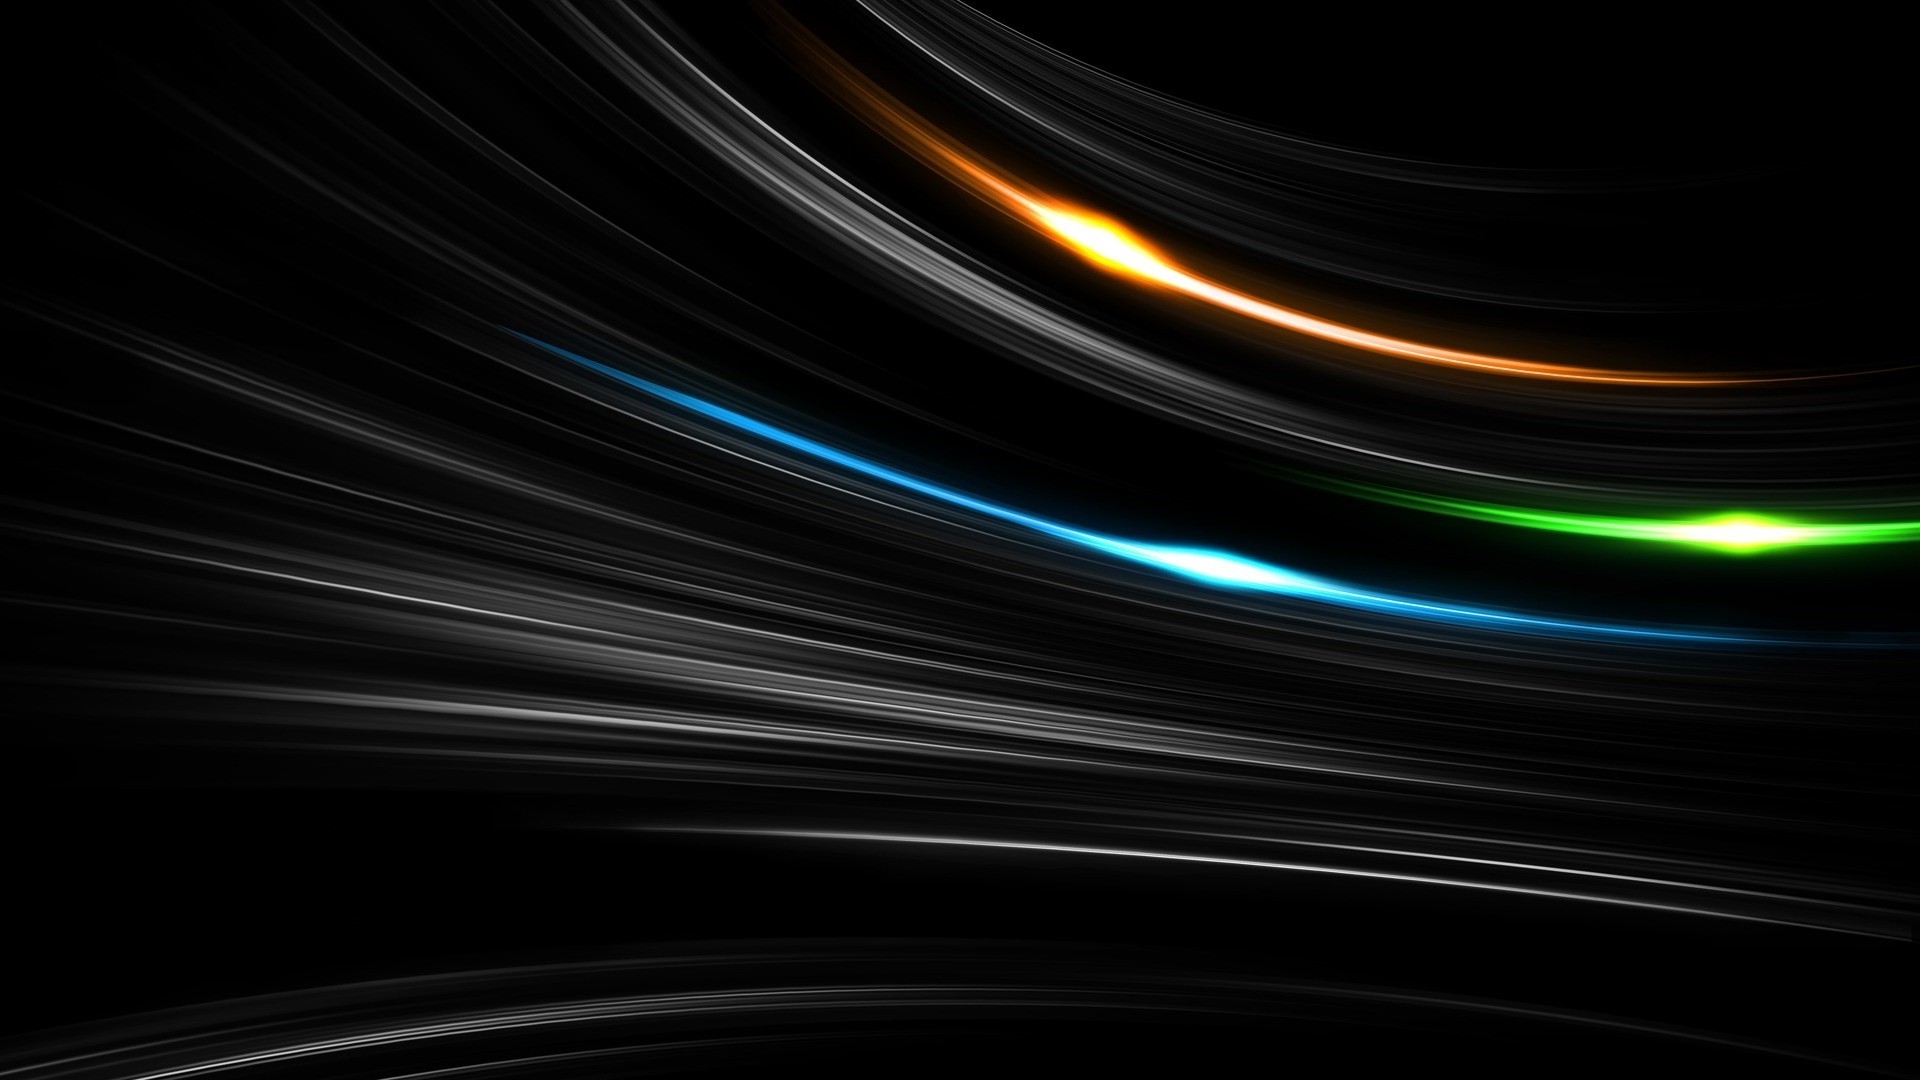 1920x1080 minimalism, Black Background, Digital Art, Abstract, Lines, Glowing,  Orange, Blue, Green Wallpapers HD / Desktop and Mobile Backgrounds